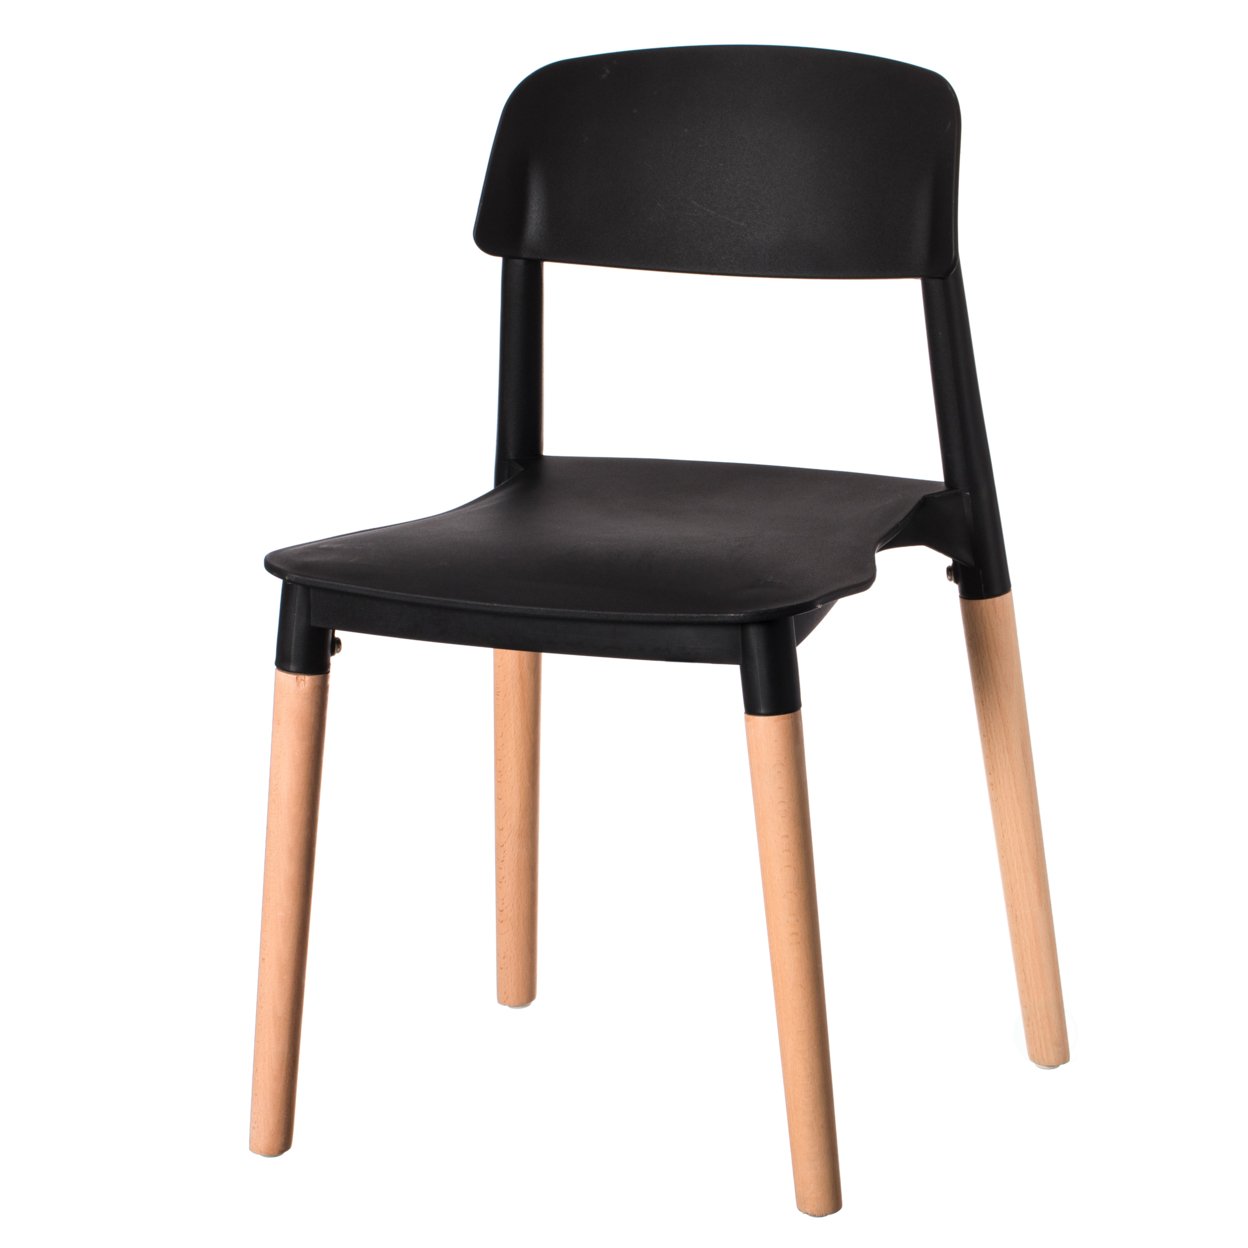 Modern Plastic Dining Chair Open Back With Beech Wood Legs - Set Of 2 Black